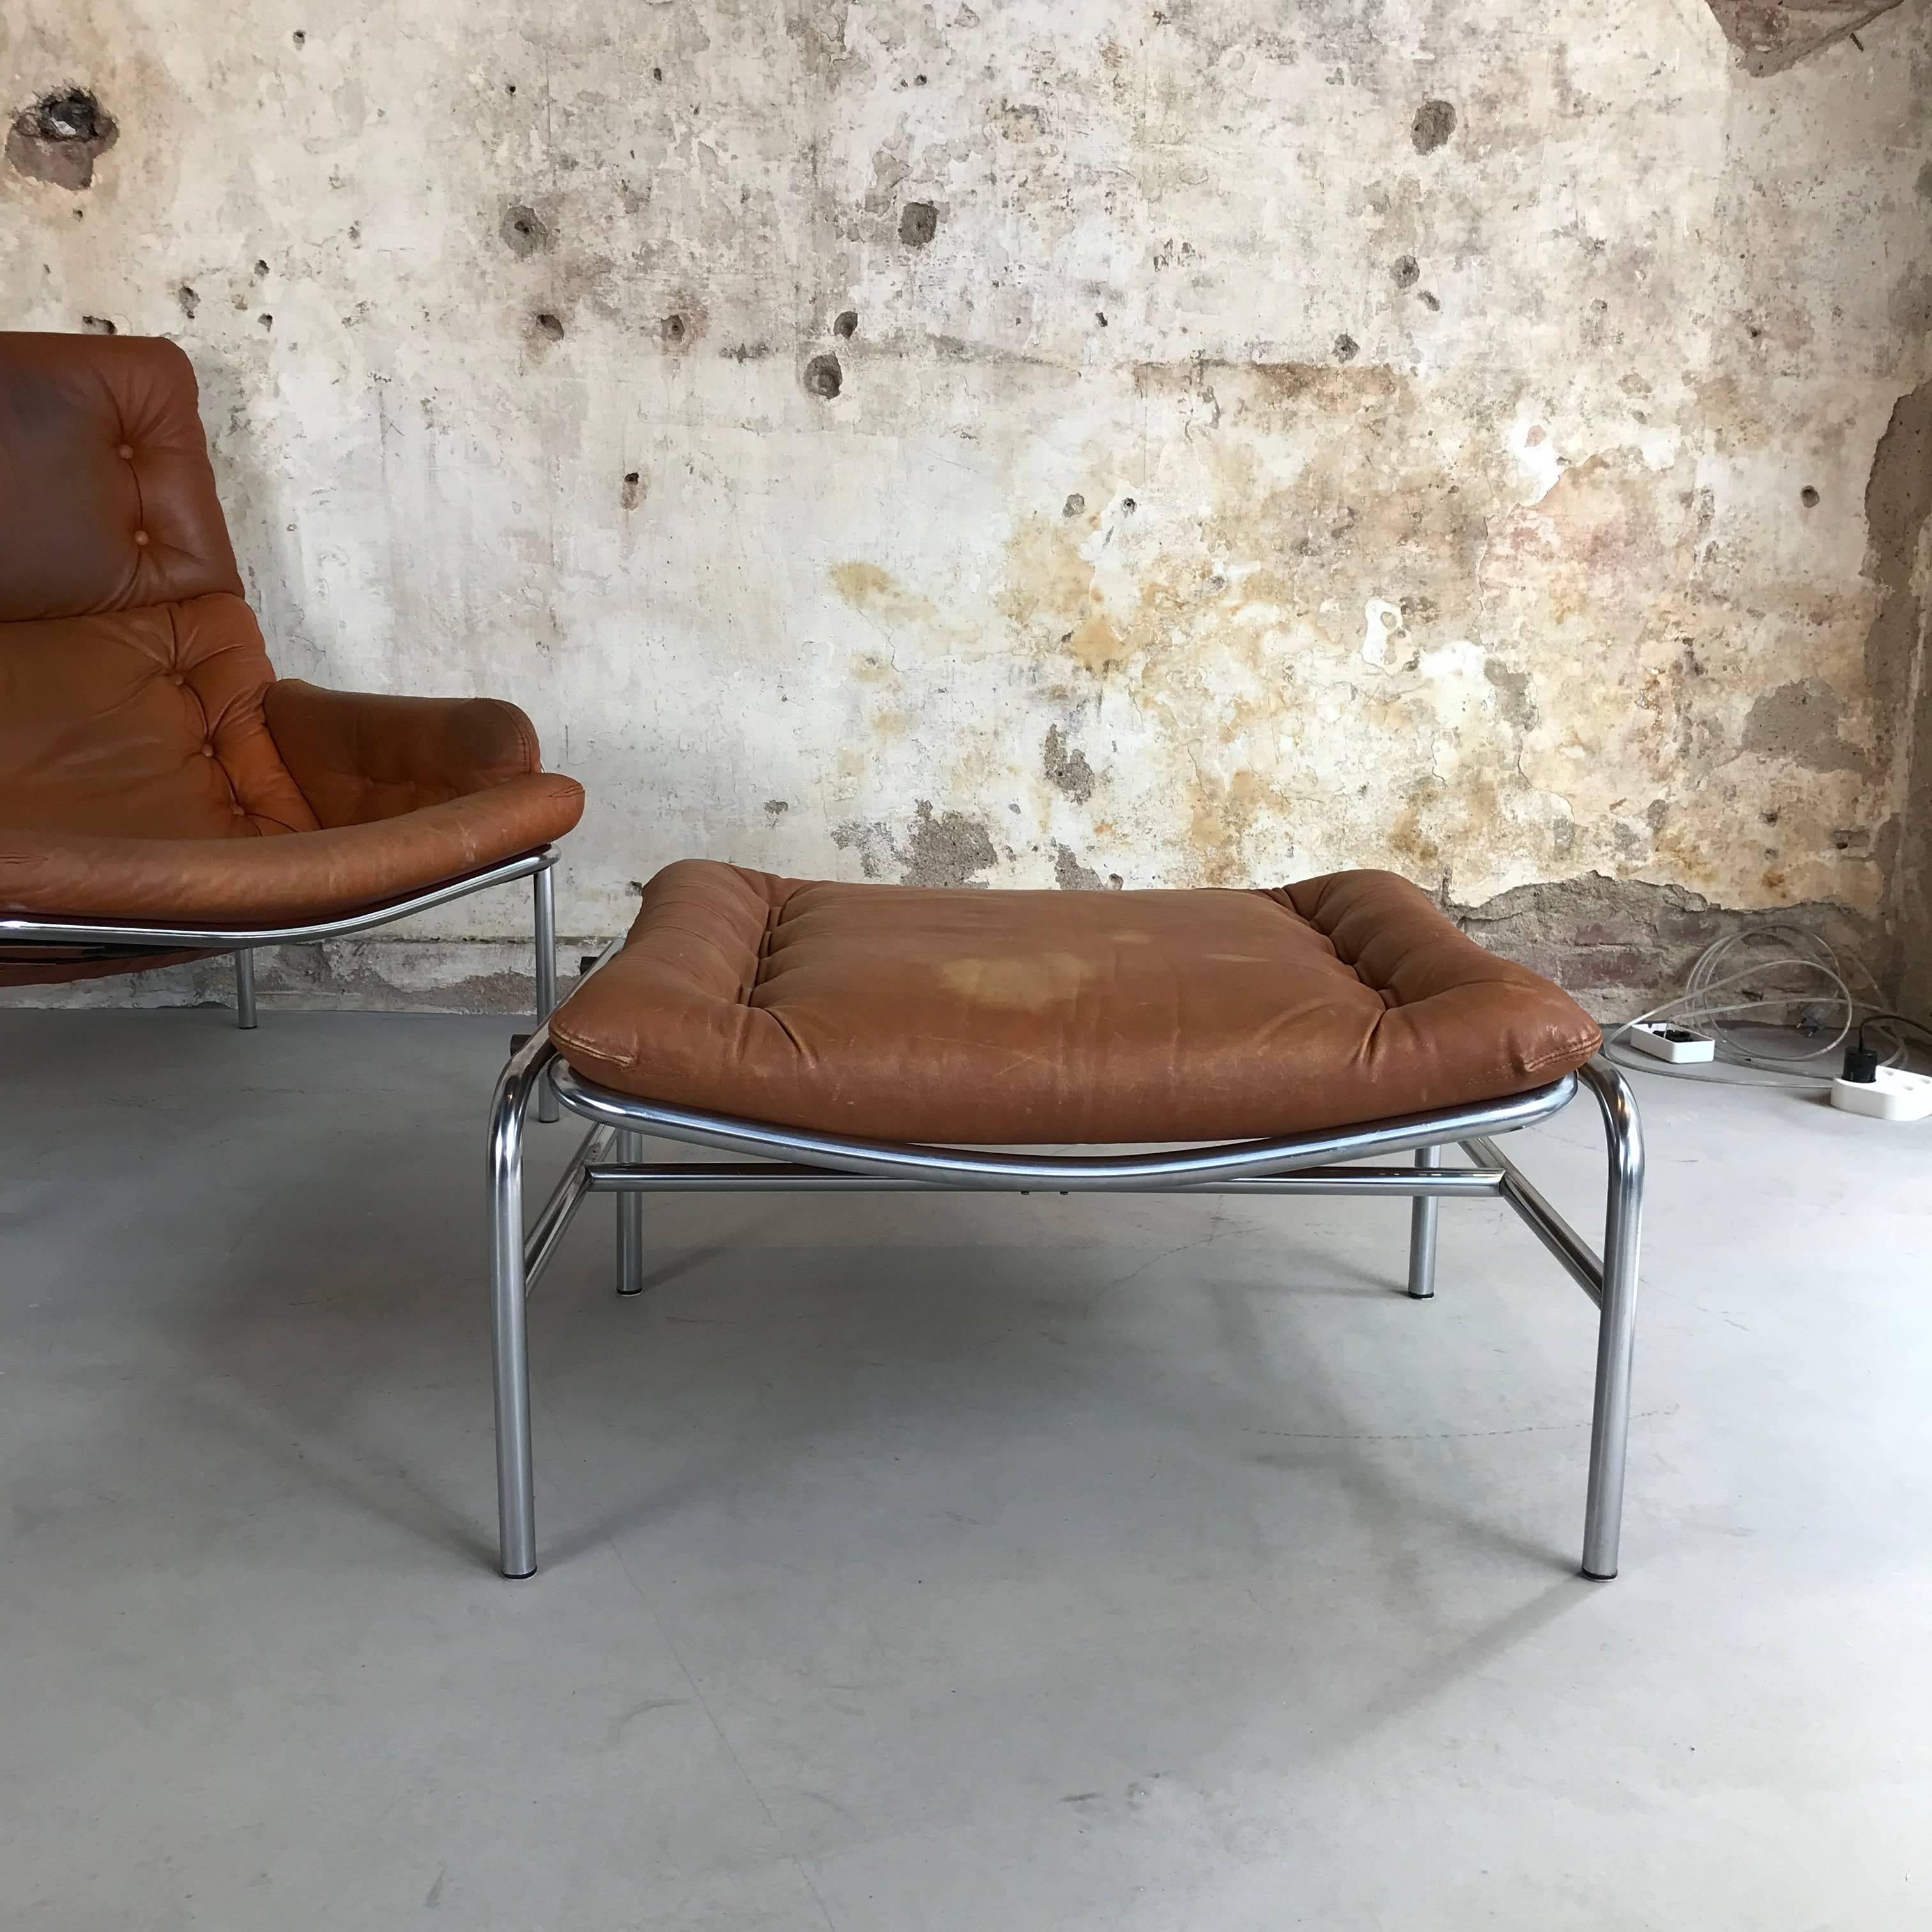 Patinated 1970s Lounge Chair Plus Ottoman SZ09 Nagoya by Martin Visser for Spectrum